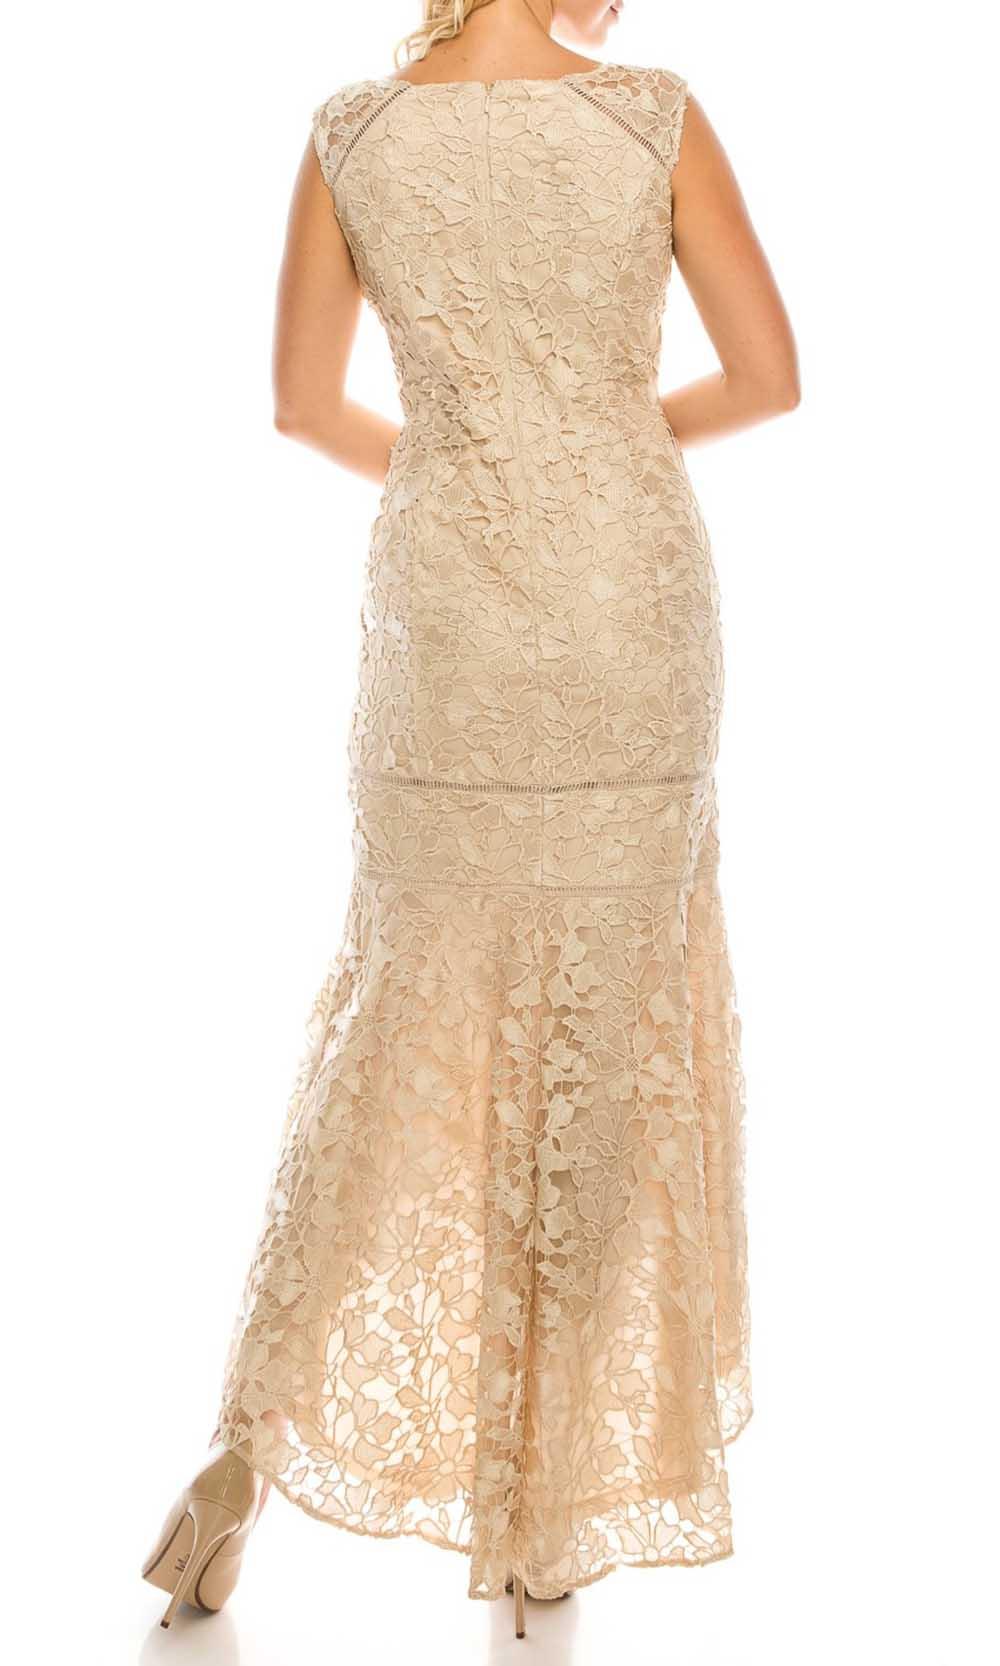 Adrianna Papell Ap1e203392 Lace V-neck Dress in Natural | Lyst